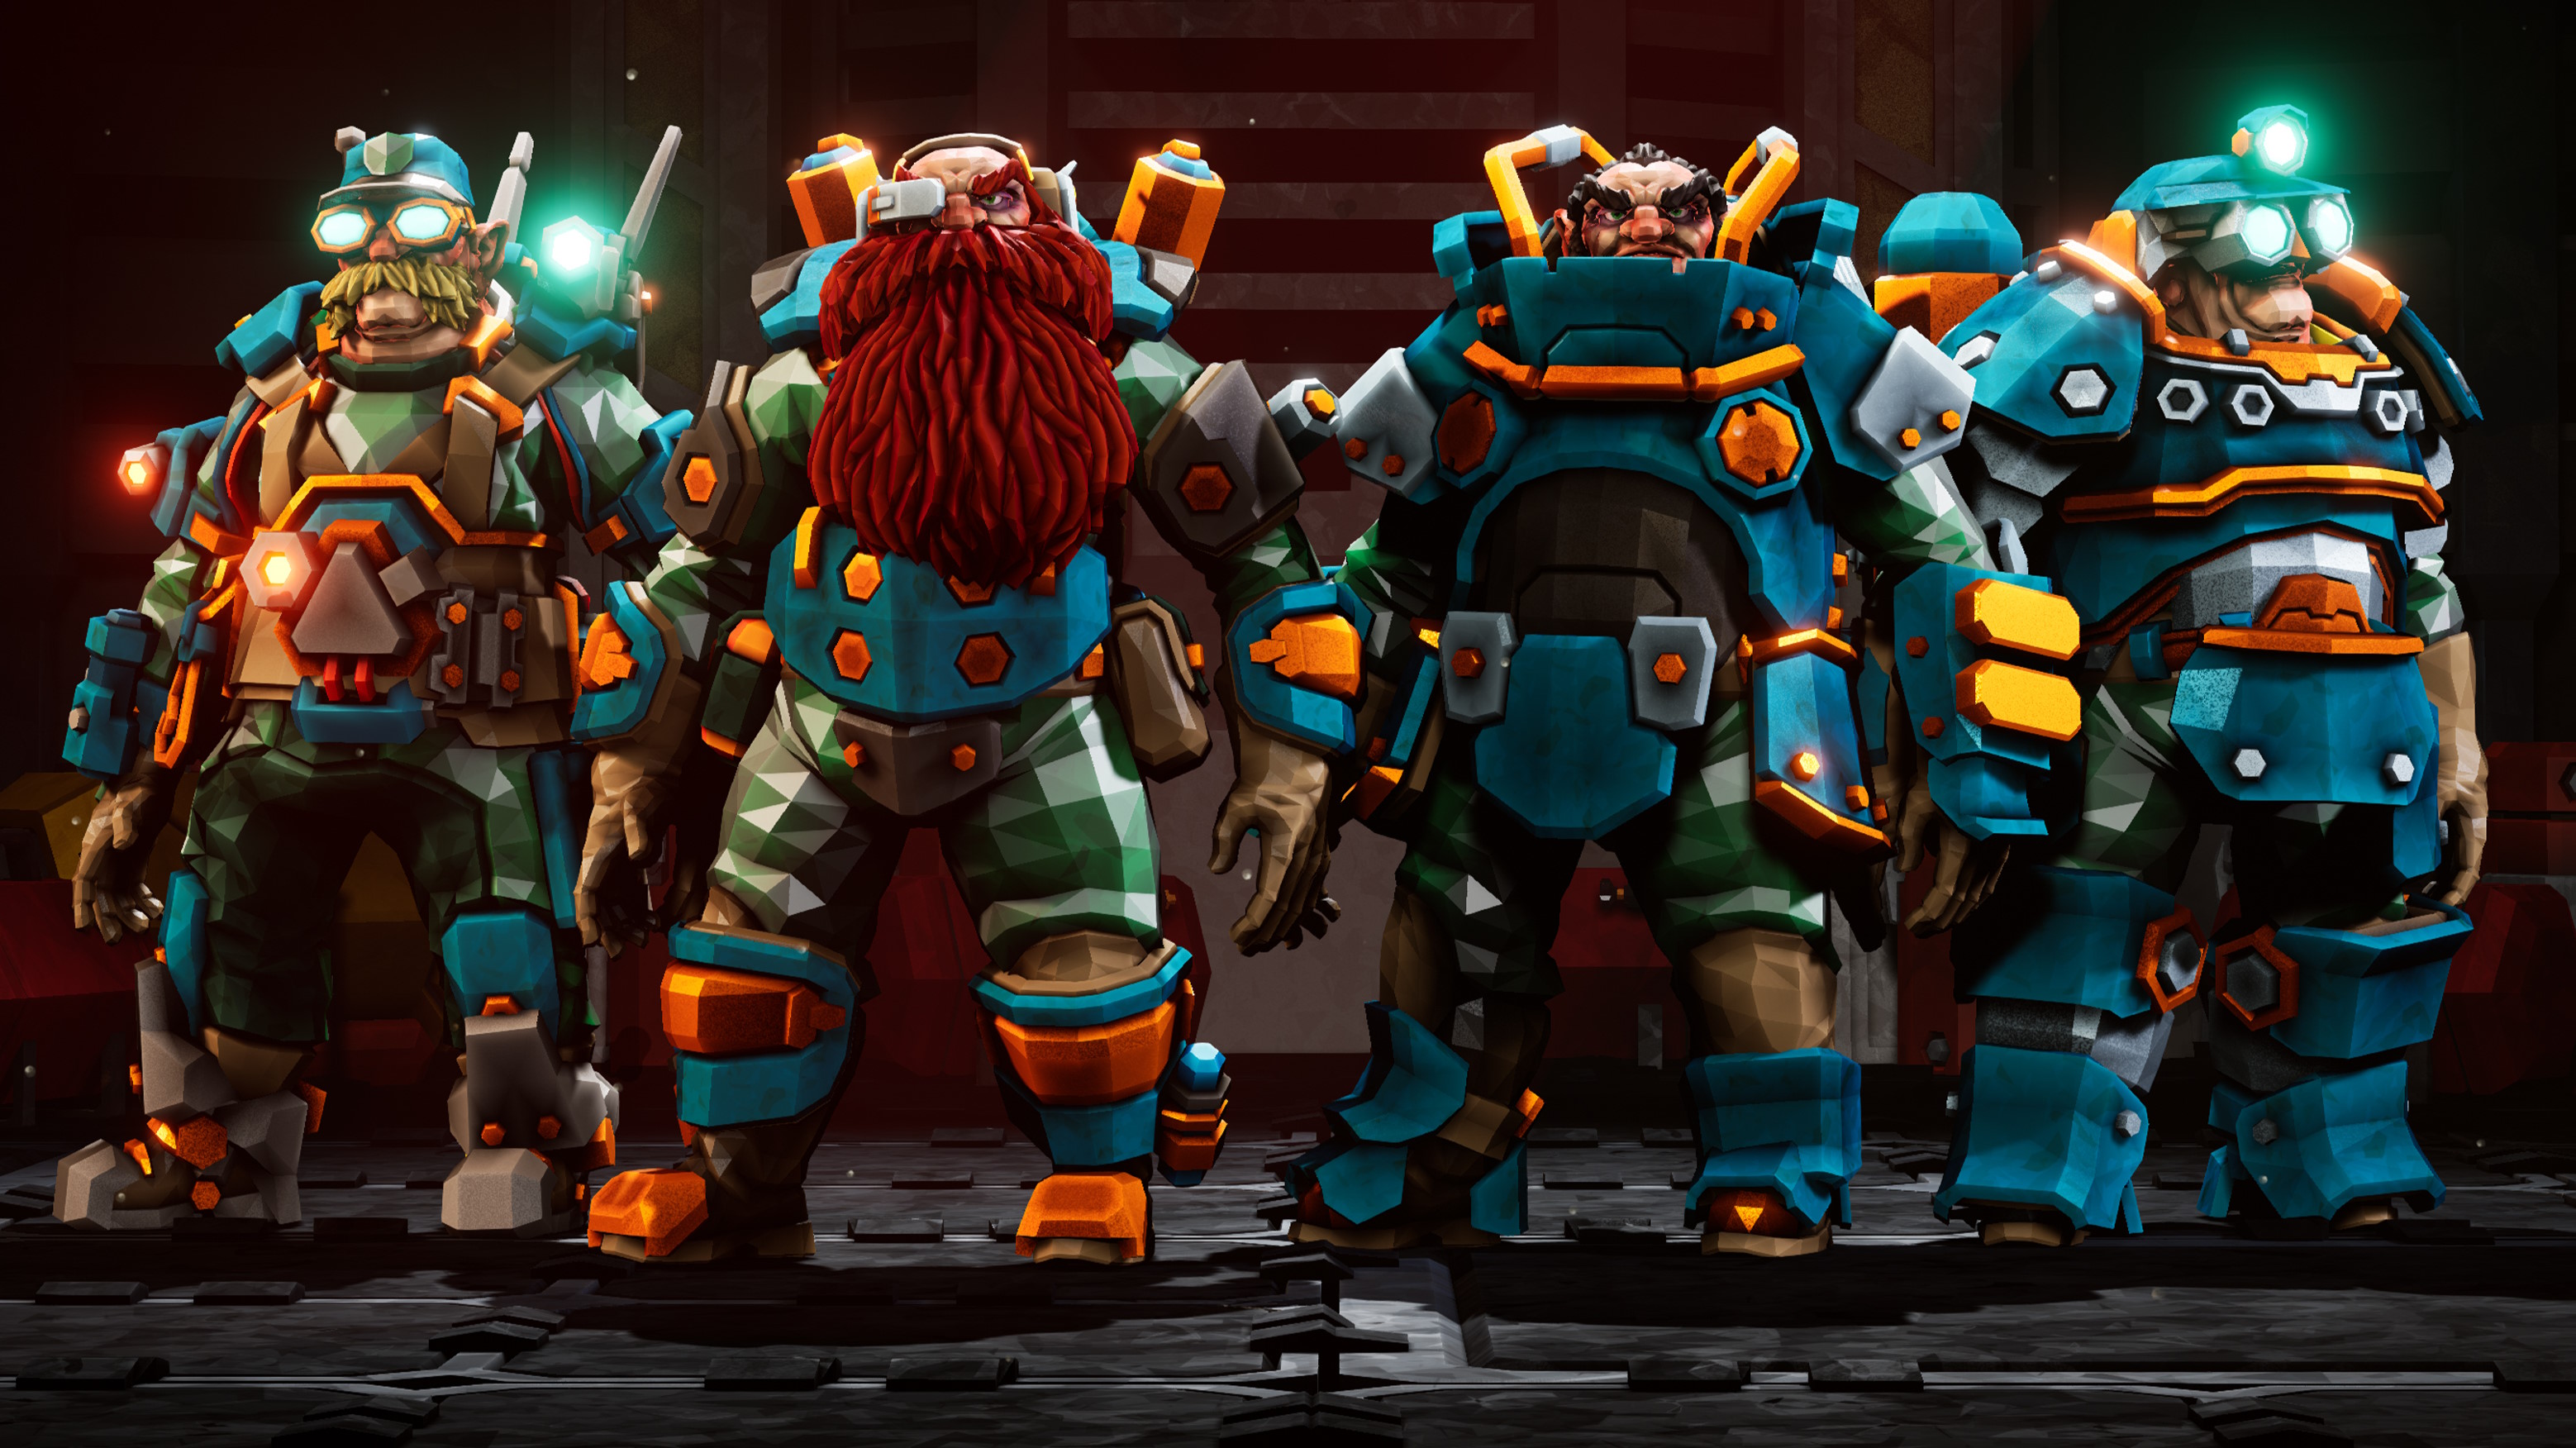  Deep Rock Galactic studio remakes cosmetic DLC after fans complain: 'You’re putting down good money for these items, and you want them to stand out—we hear you!' 